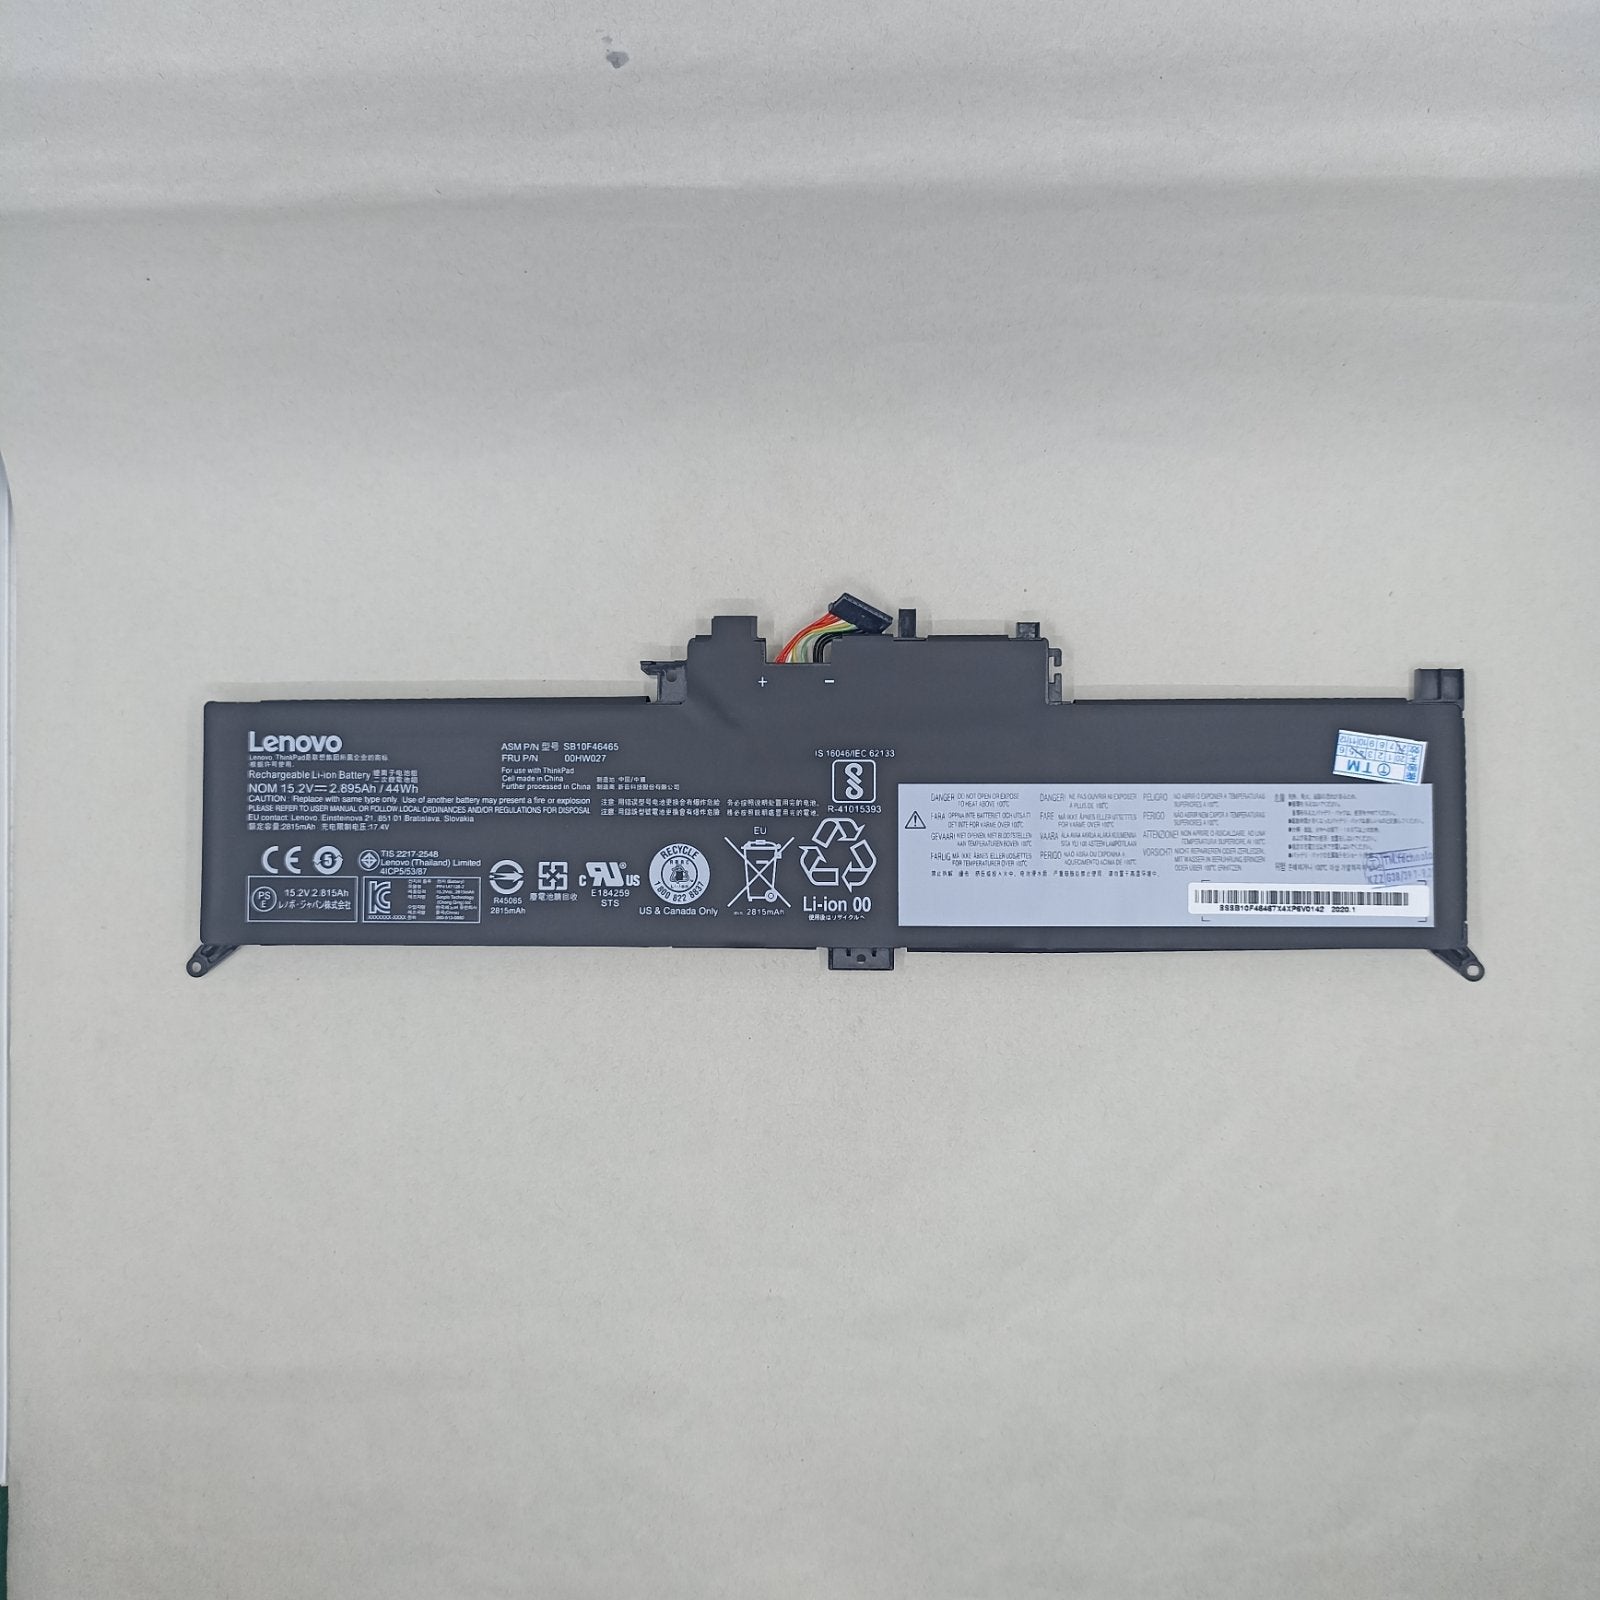 Replacement Battery for Lenovo Yoga 260 A1